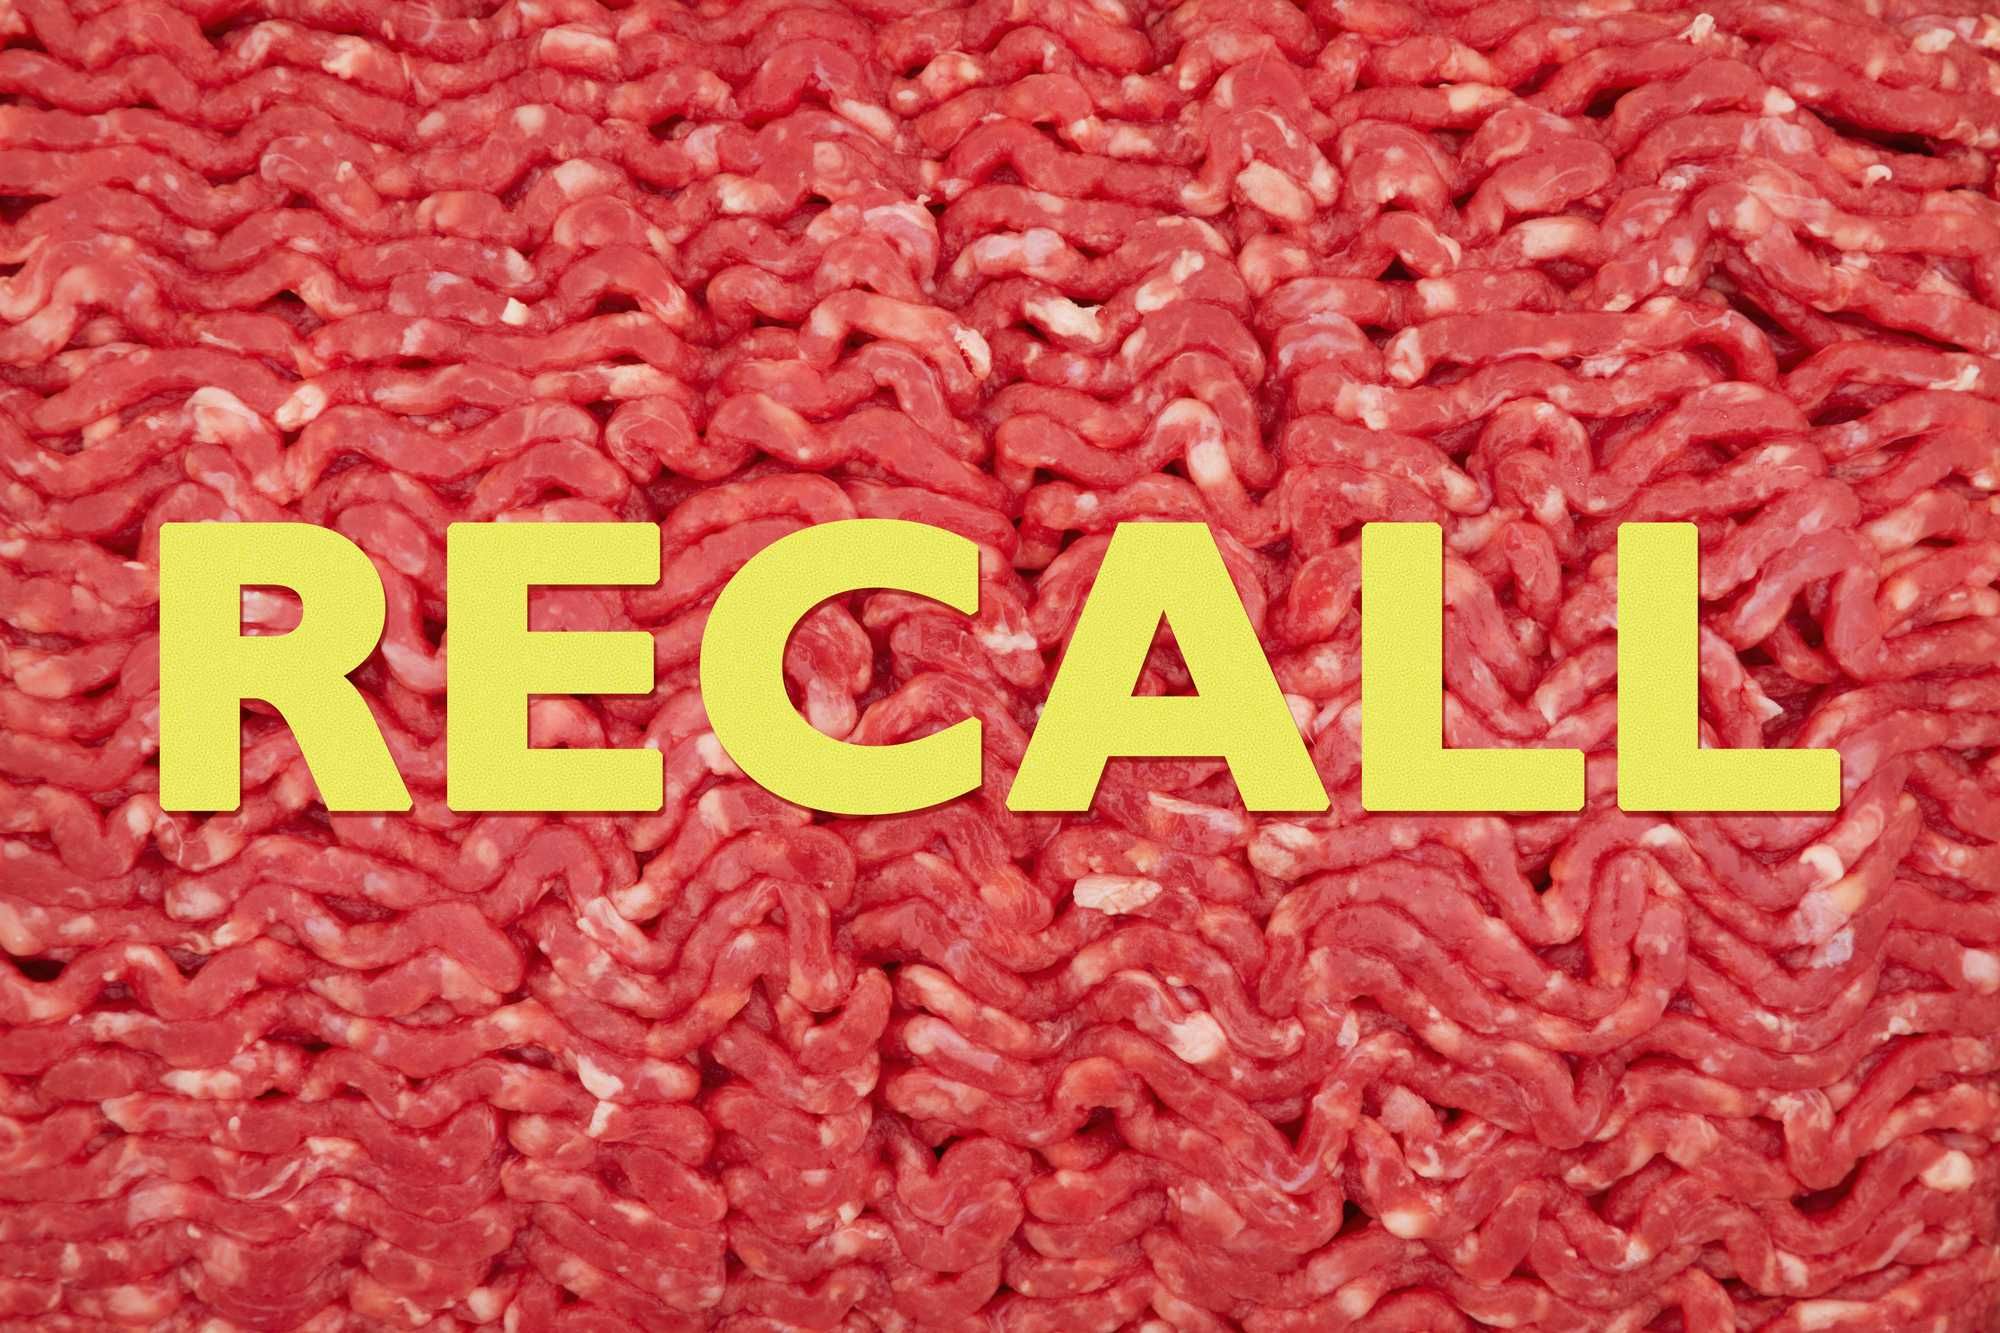 A ground beef recall of 40,000 pounds of meat has been initiated due to E.coli concerns.